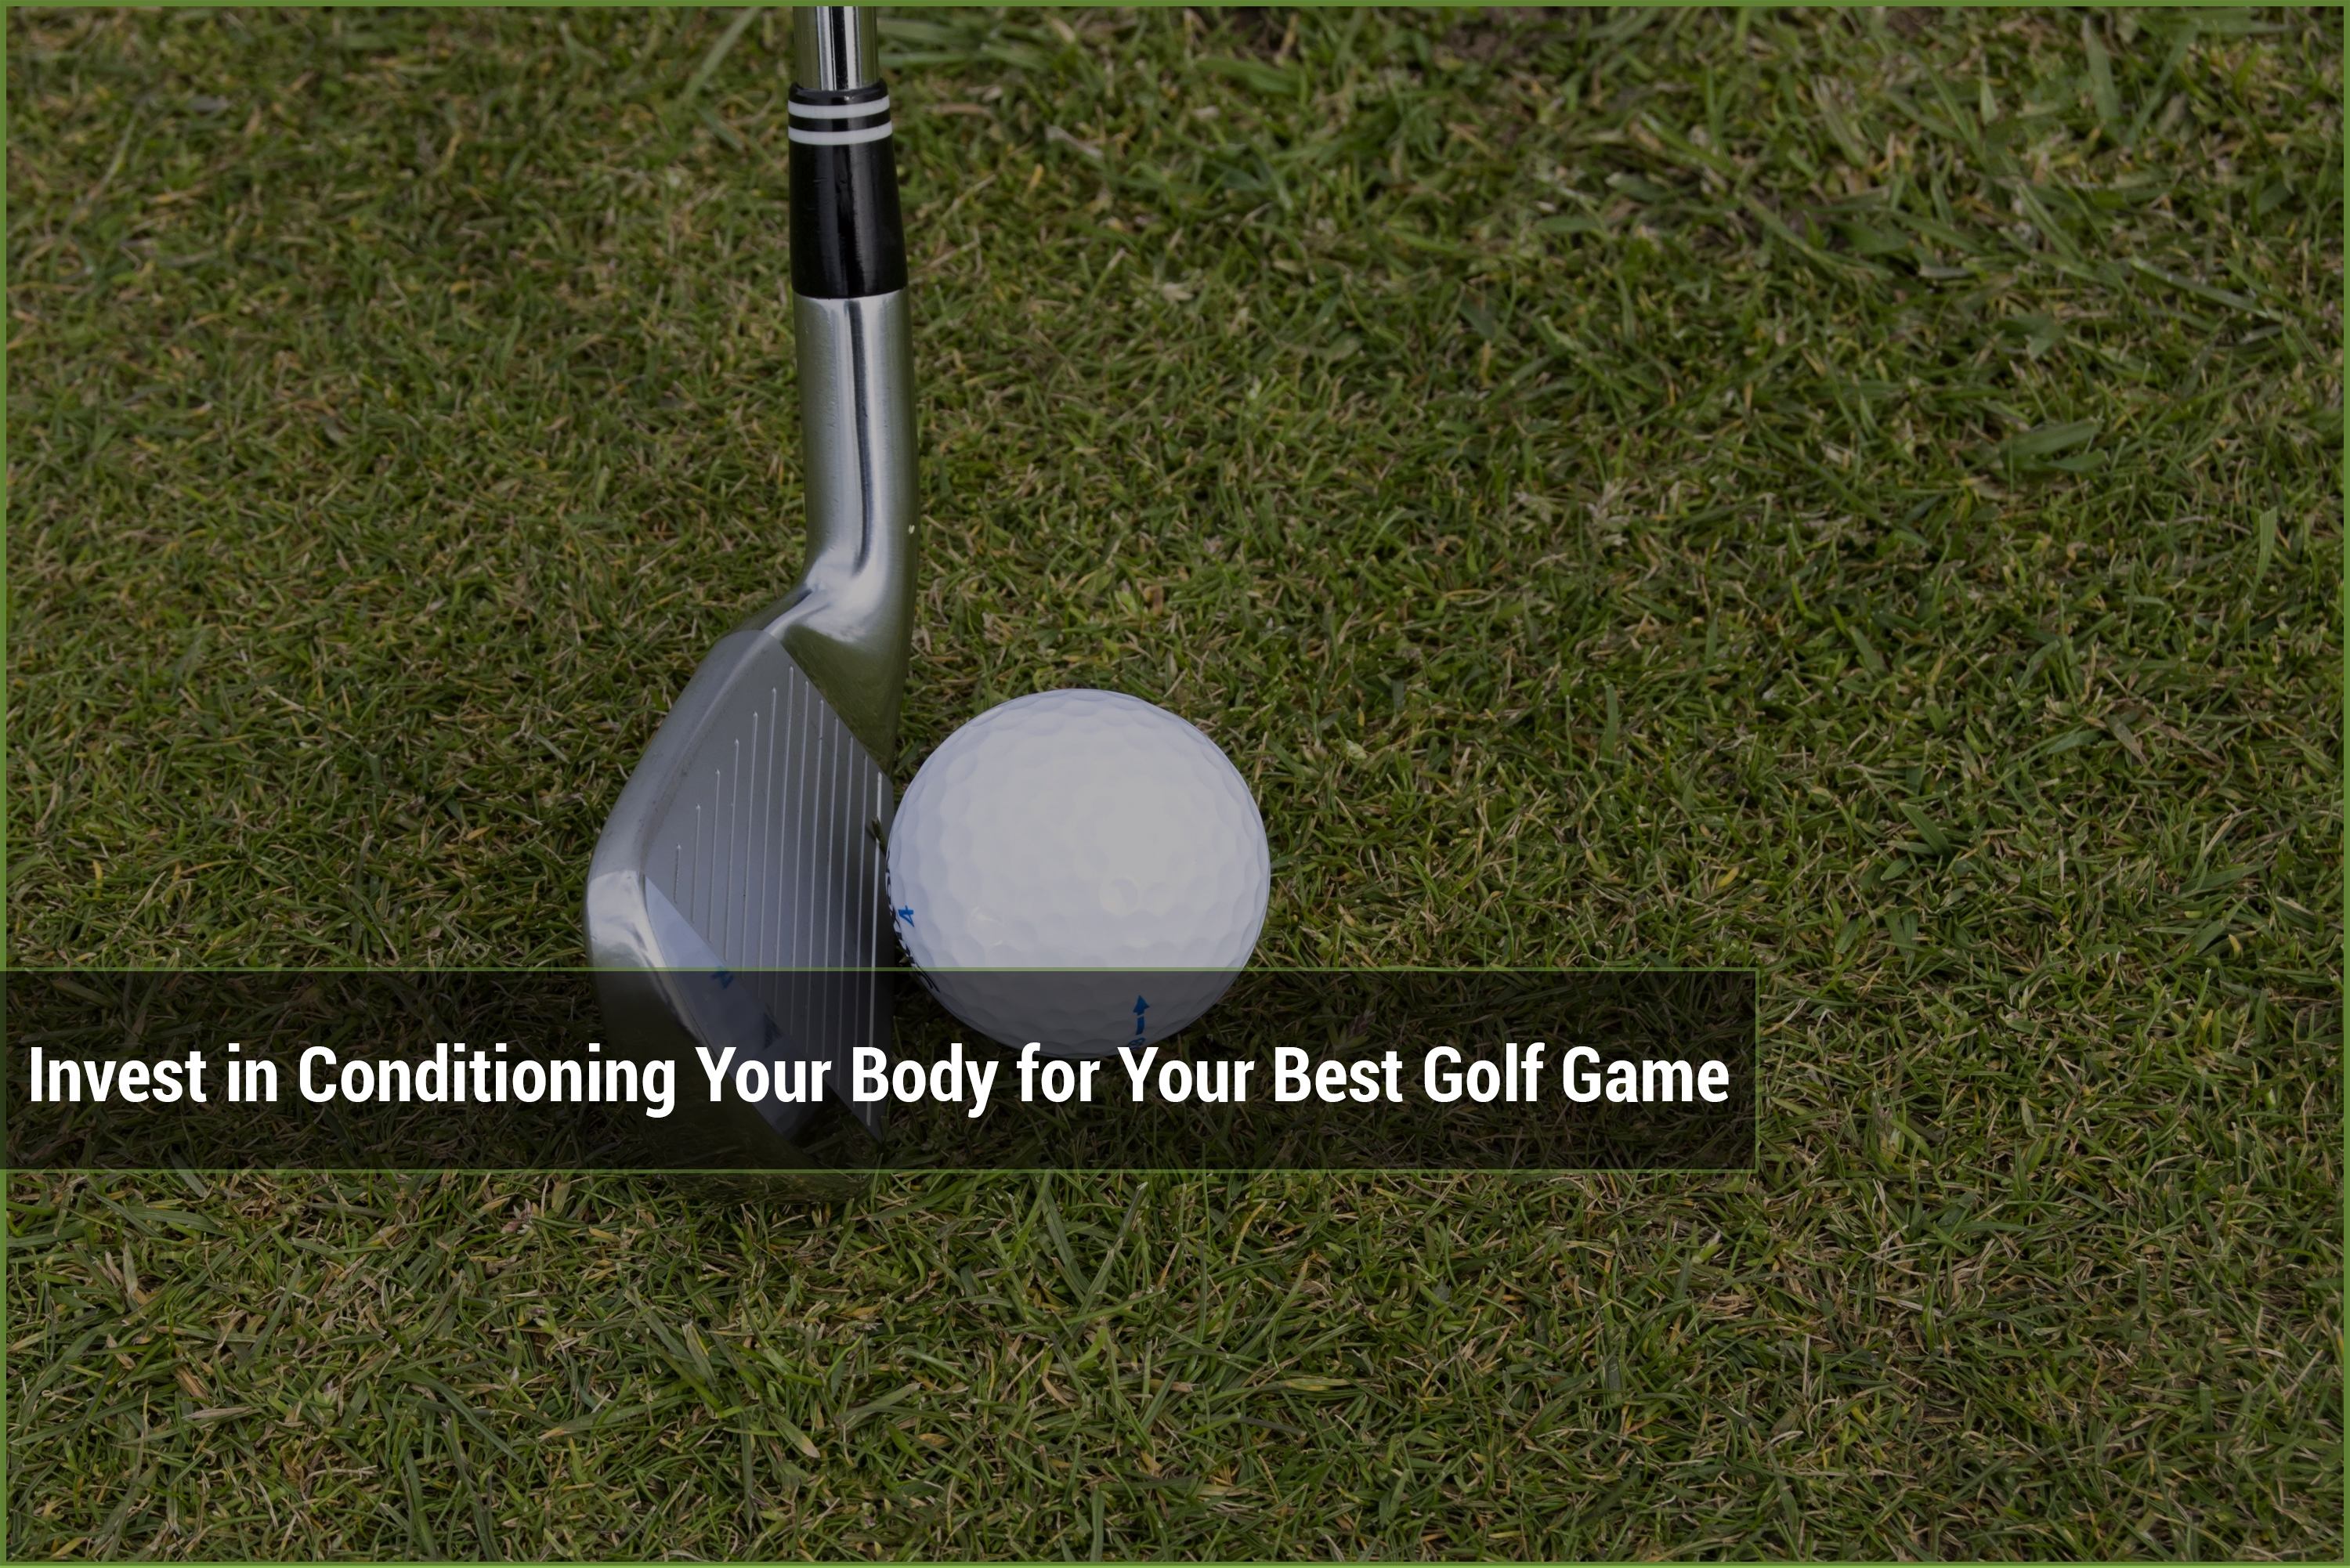 Invest in conditioning your body for your best golf game